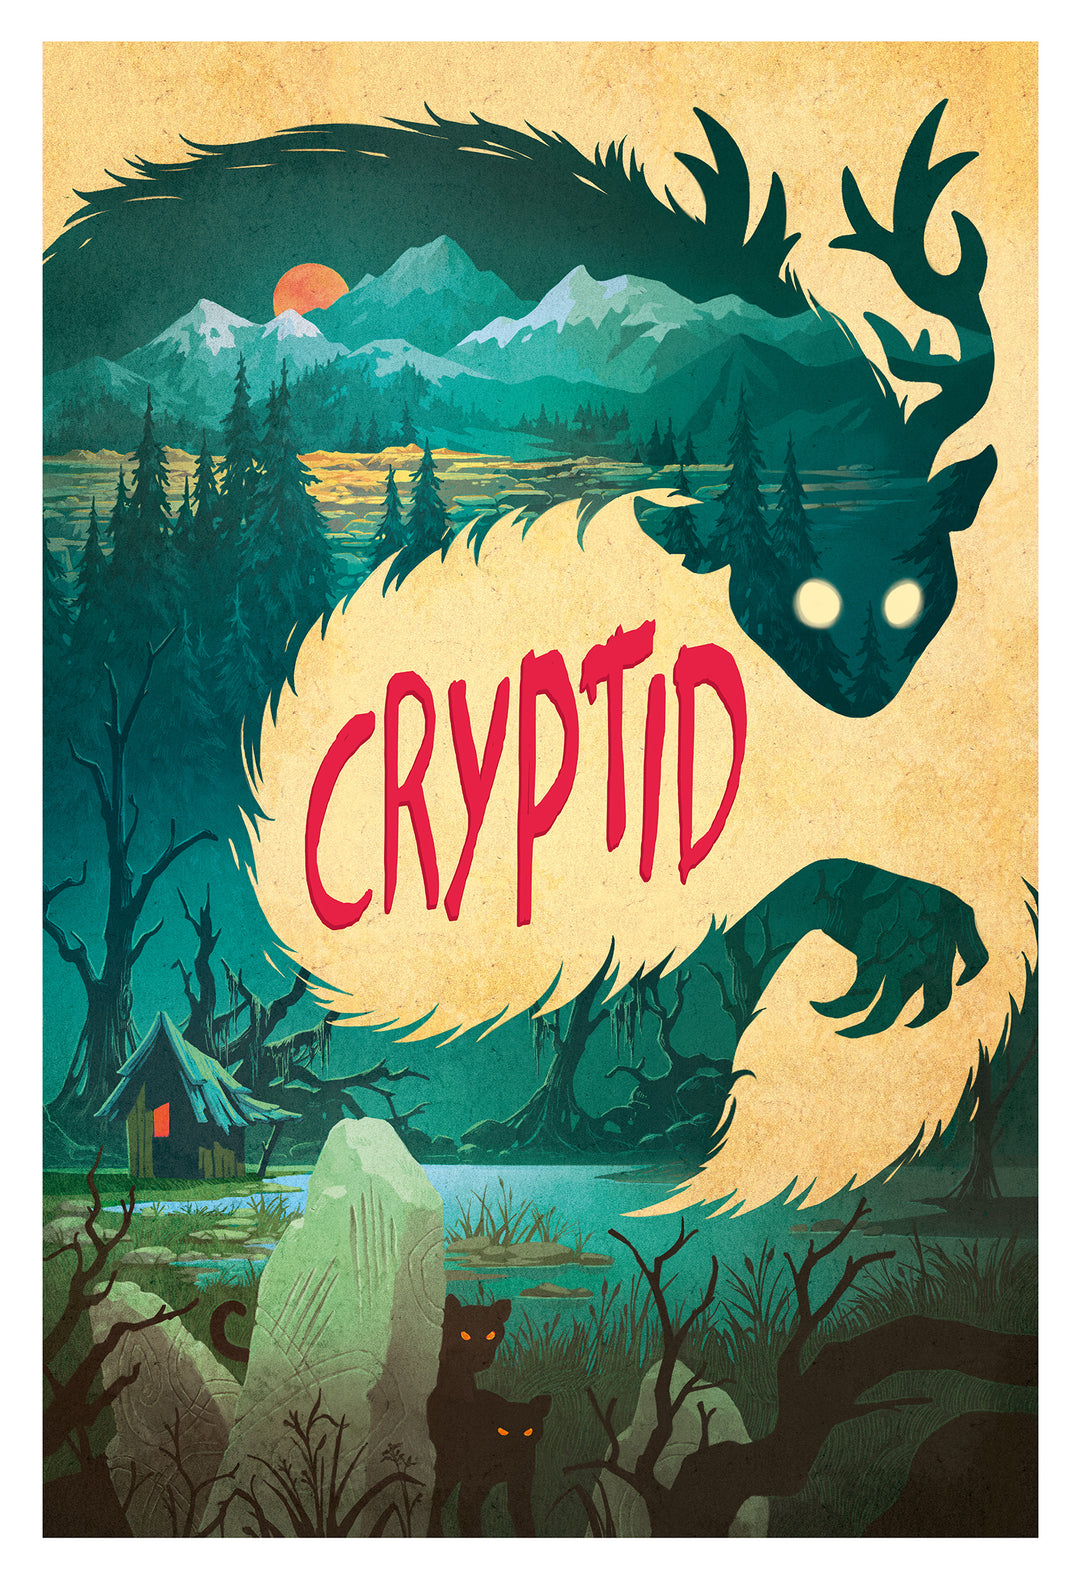 Alternative artwork for the board game Cryptid, as part of BoardGameGeek's Artist Series, featuring the silhouette of an antlered creature. Within this silhouette is an illustration of a wooden shack, gloomy swamp, and cats with glowing eyes.